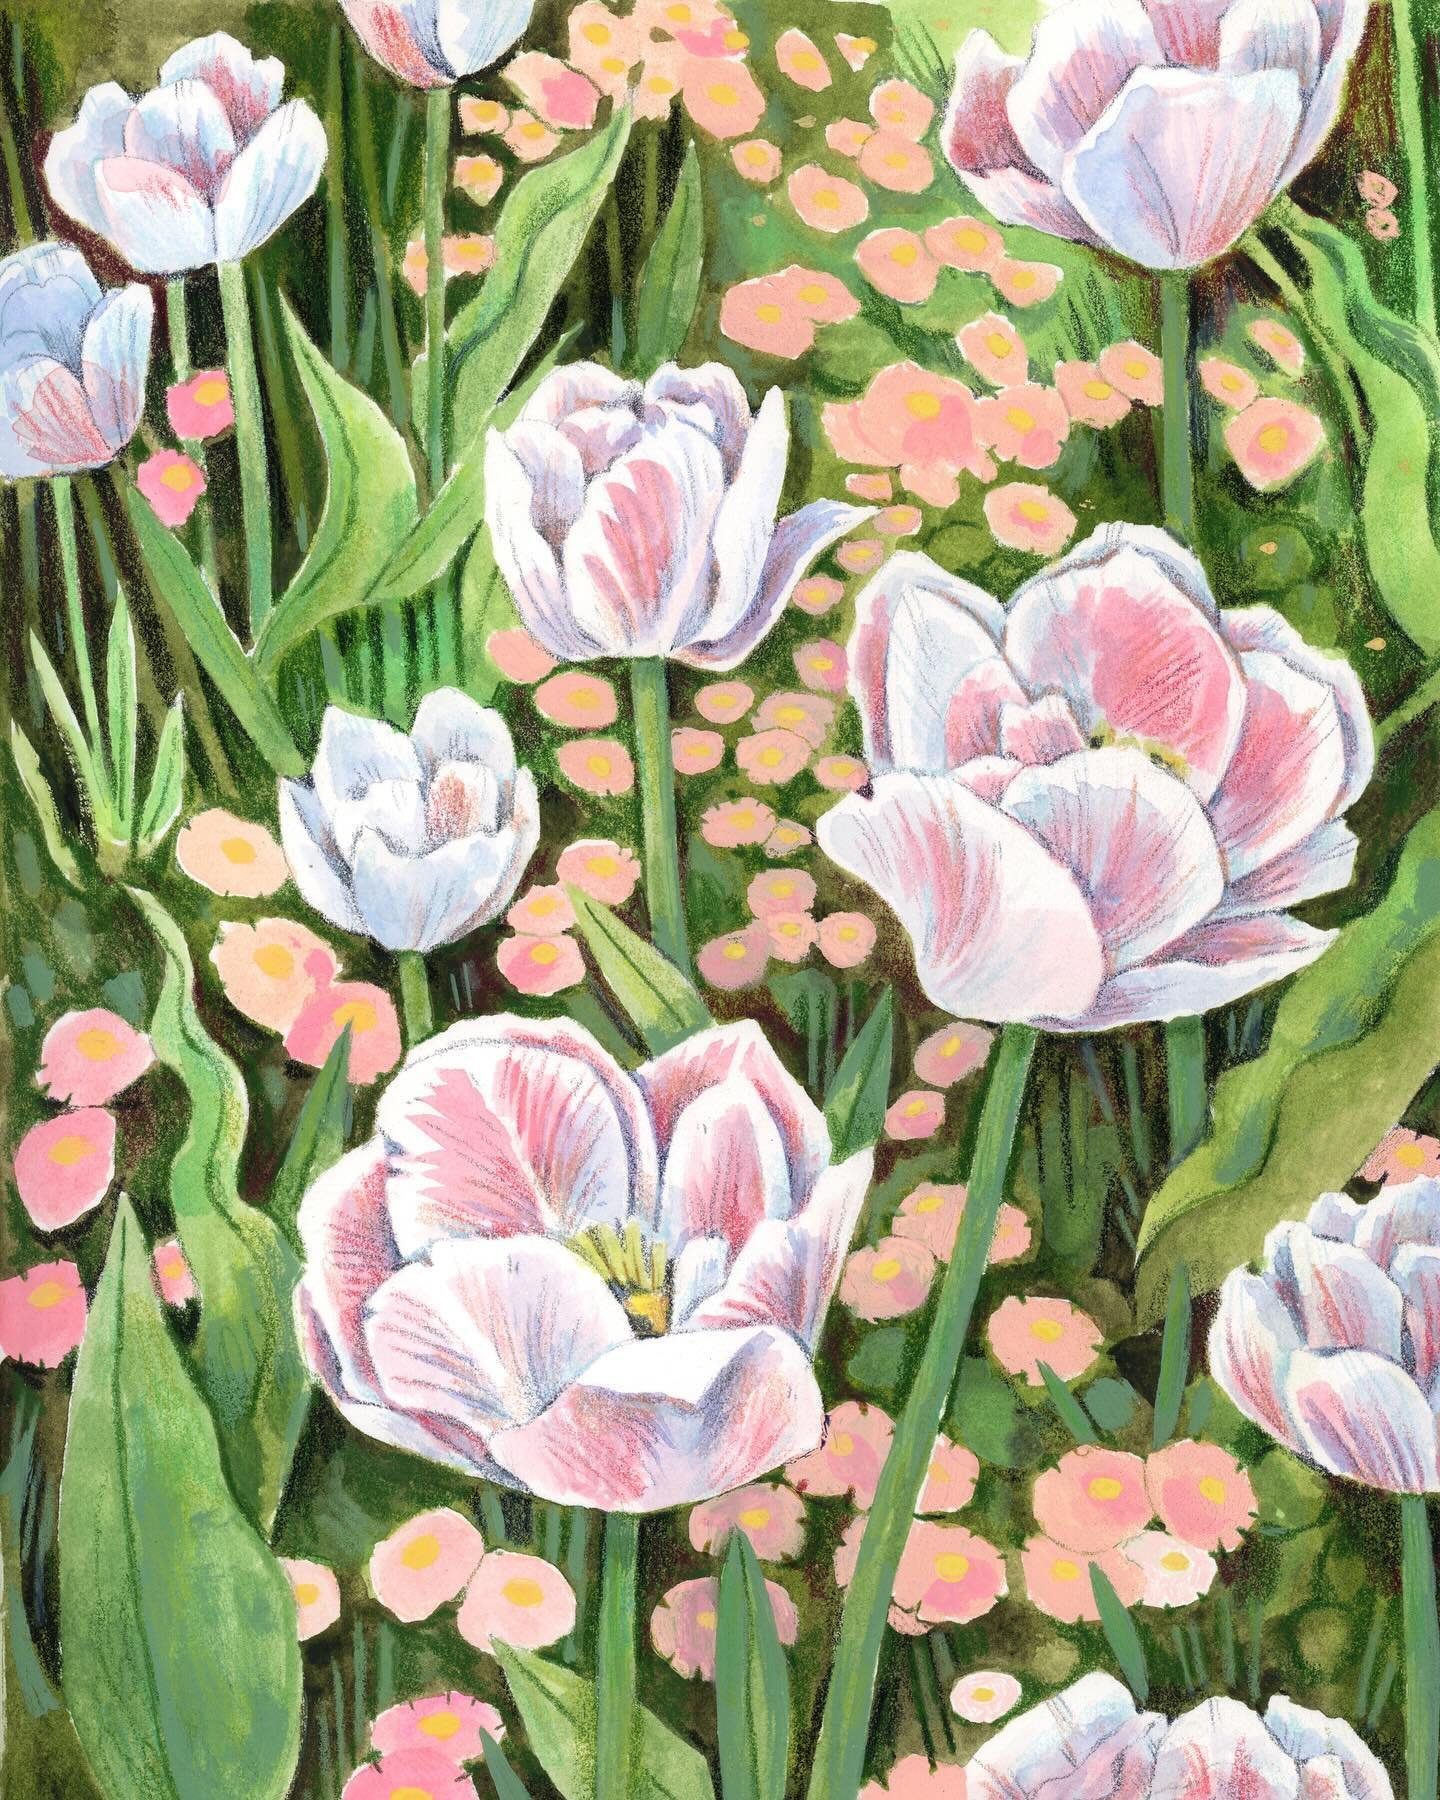 I loved this week&rsquo;s reference photos for the landscape art club (if you&rsquo;ve been around for a while you know that I enjoy illustrating flowers) and enjoyed creating this painting so much! These are from the Floriade Festival, Canberra, Aus